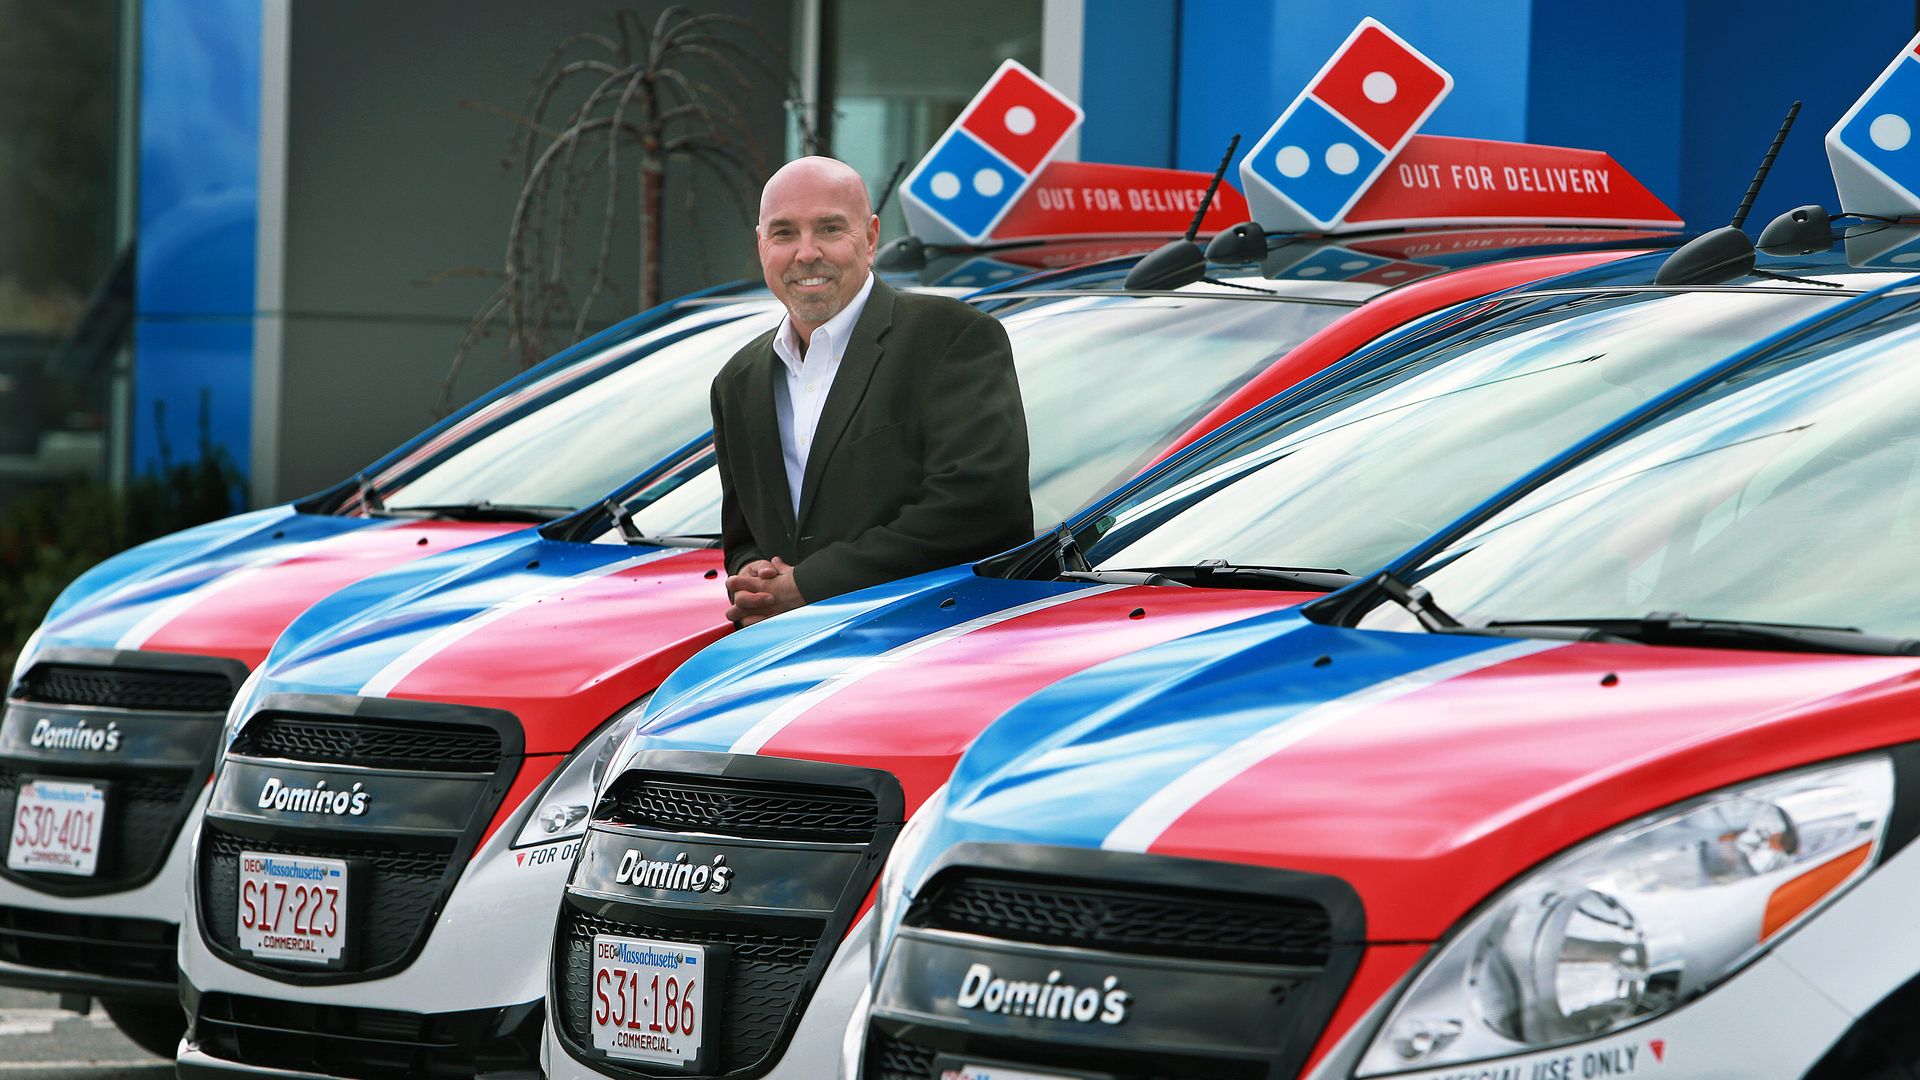 Domino's delivery cars.